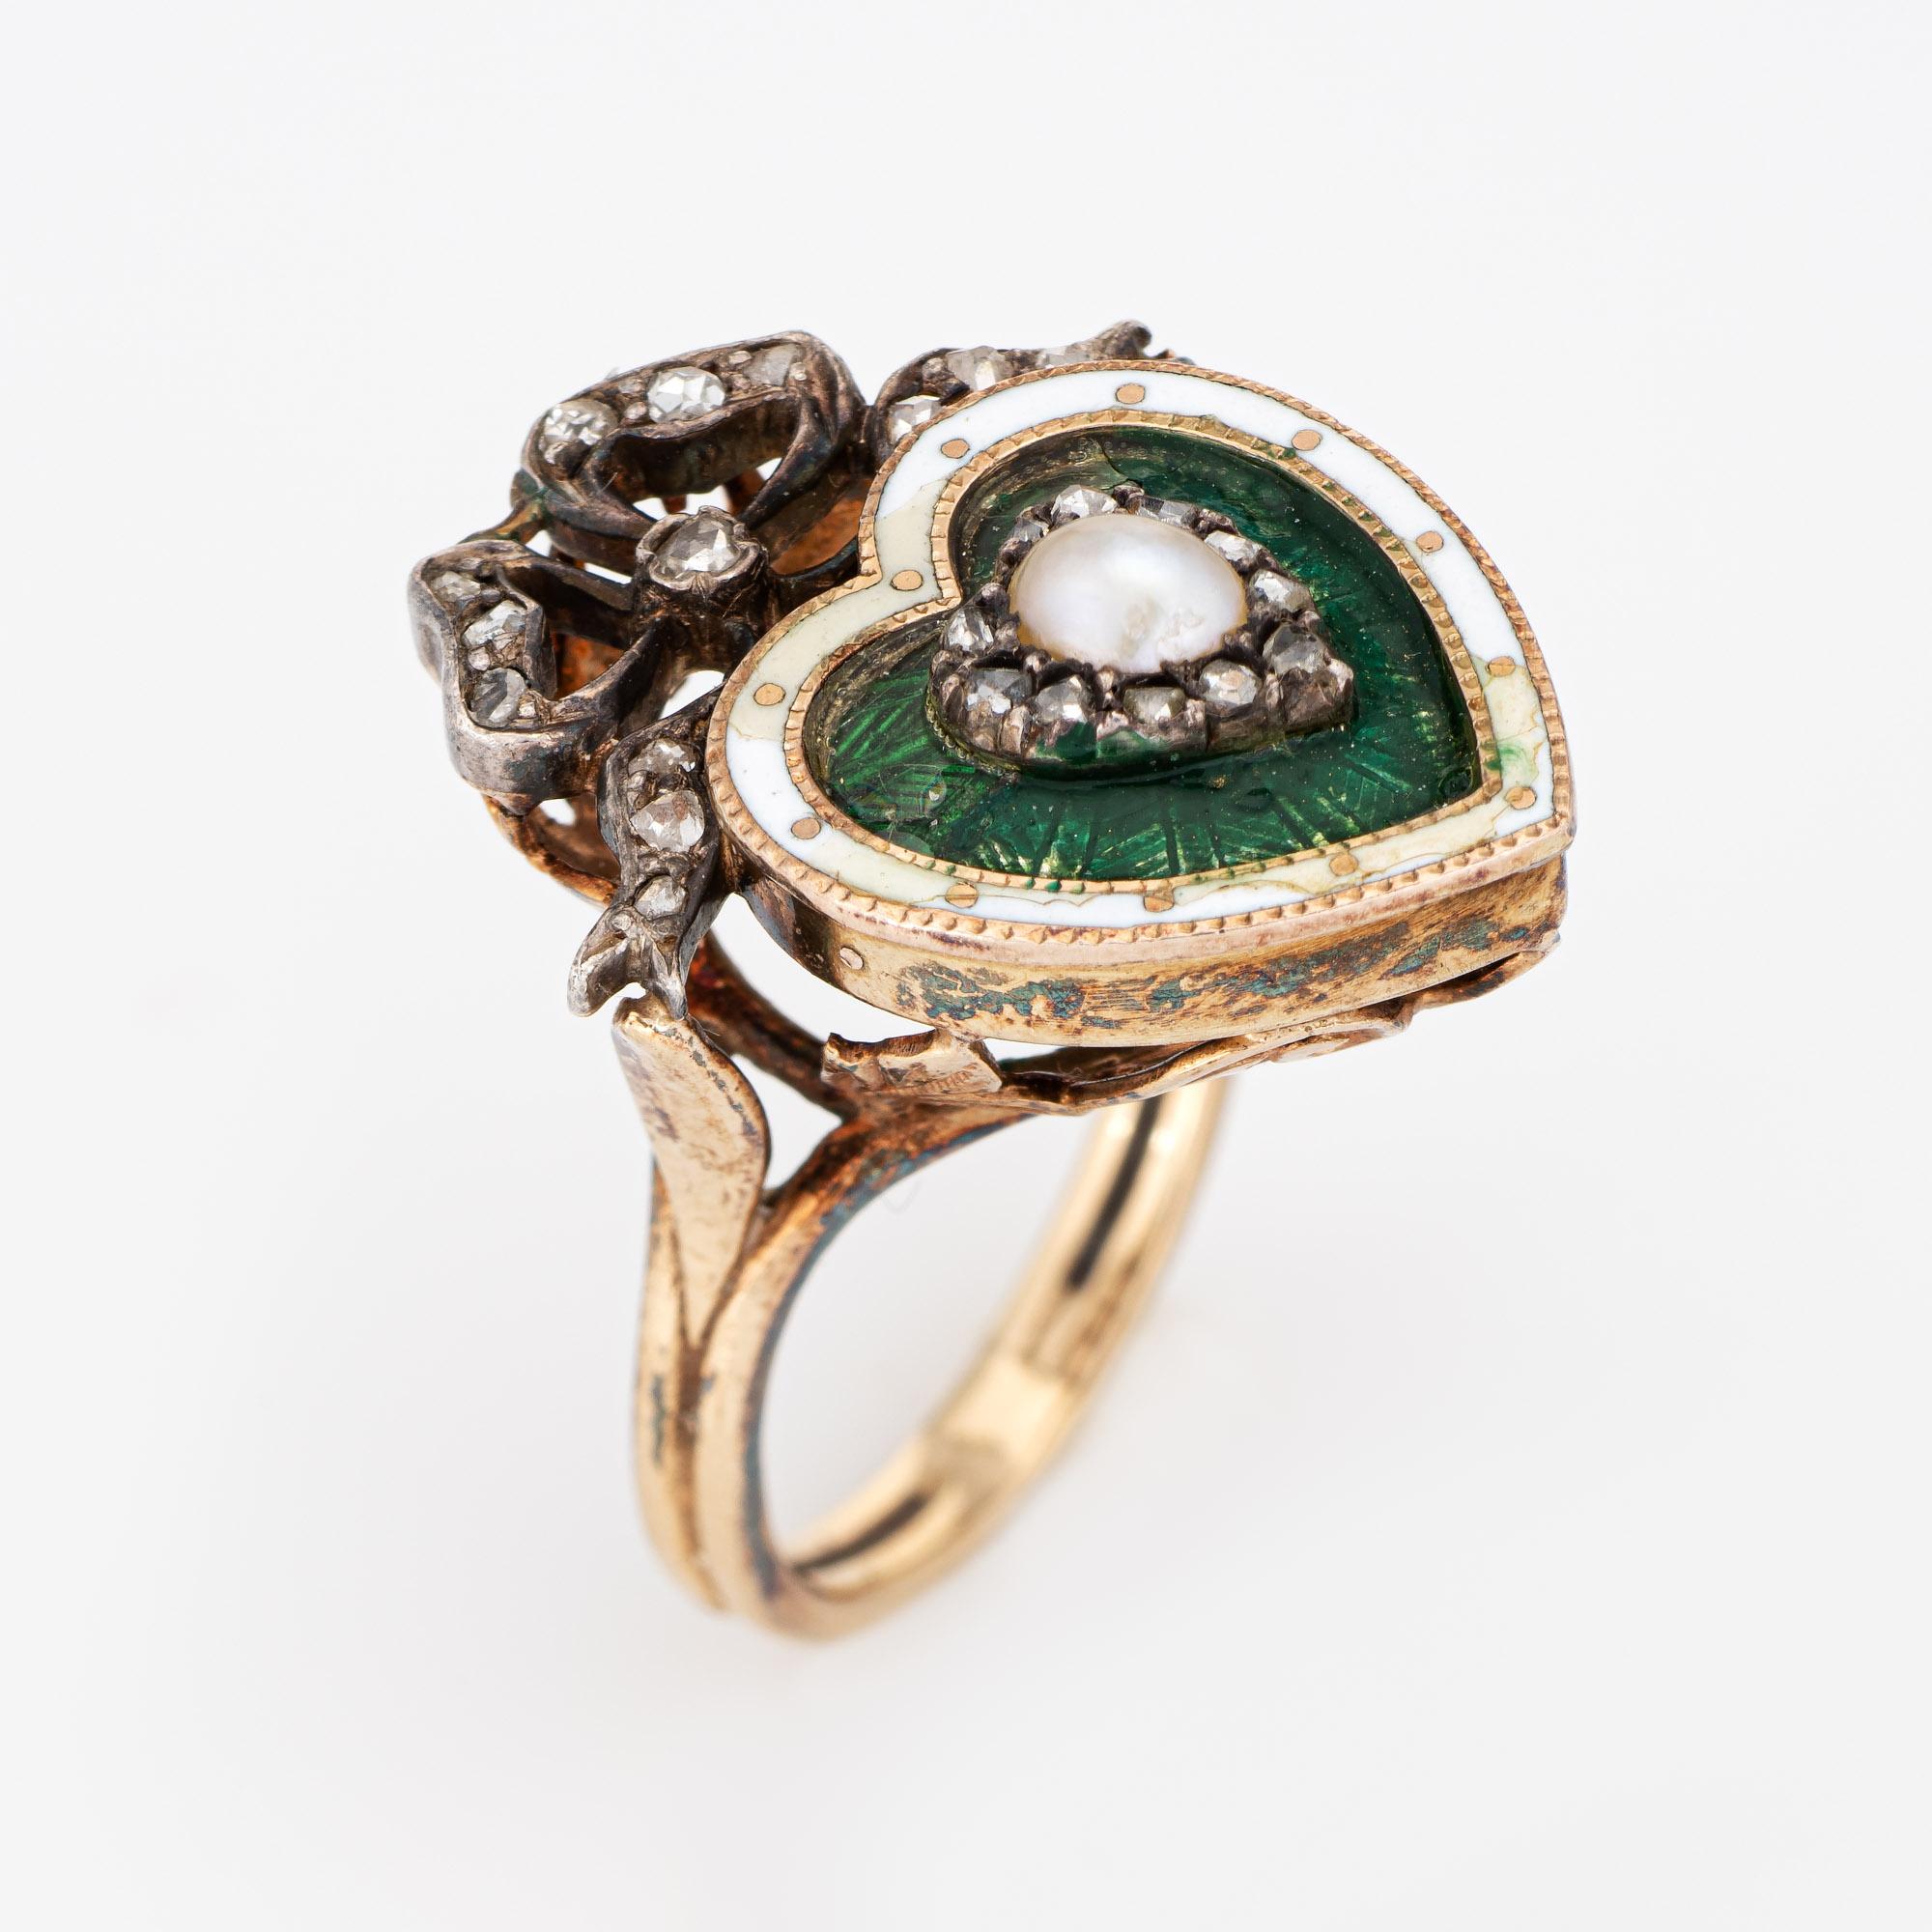 Finely detailed antique Victorian guilloche enamel diamond & pearl heart ring (circa 1880s to 1900s) crafted in 15 karat yellow gold, silver topped. 

The center set natural pearl measures 4.5mm x 4mm. 24 old rose cut diamonds total an estimated